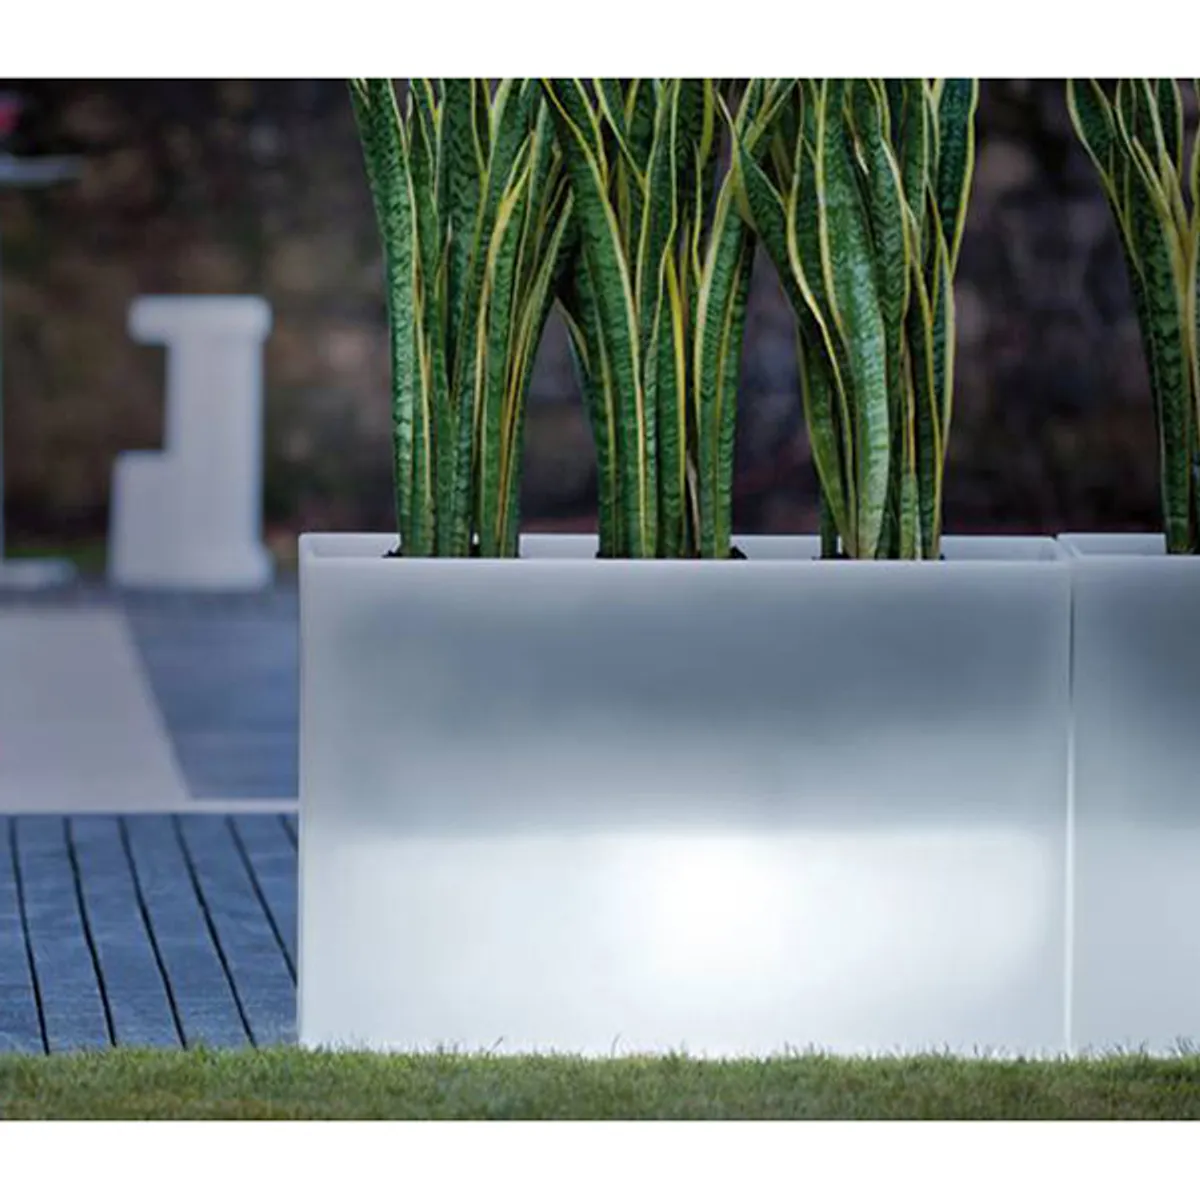 Kado Planter Illuminated Inside Out Contracts